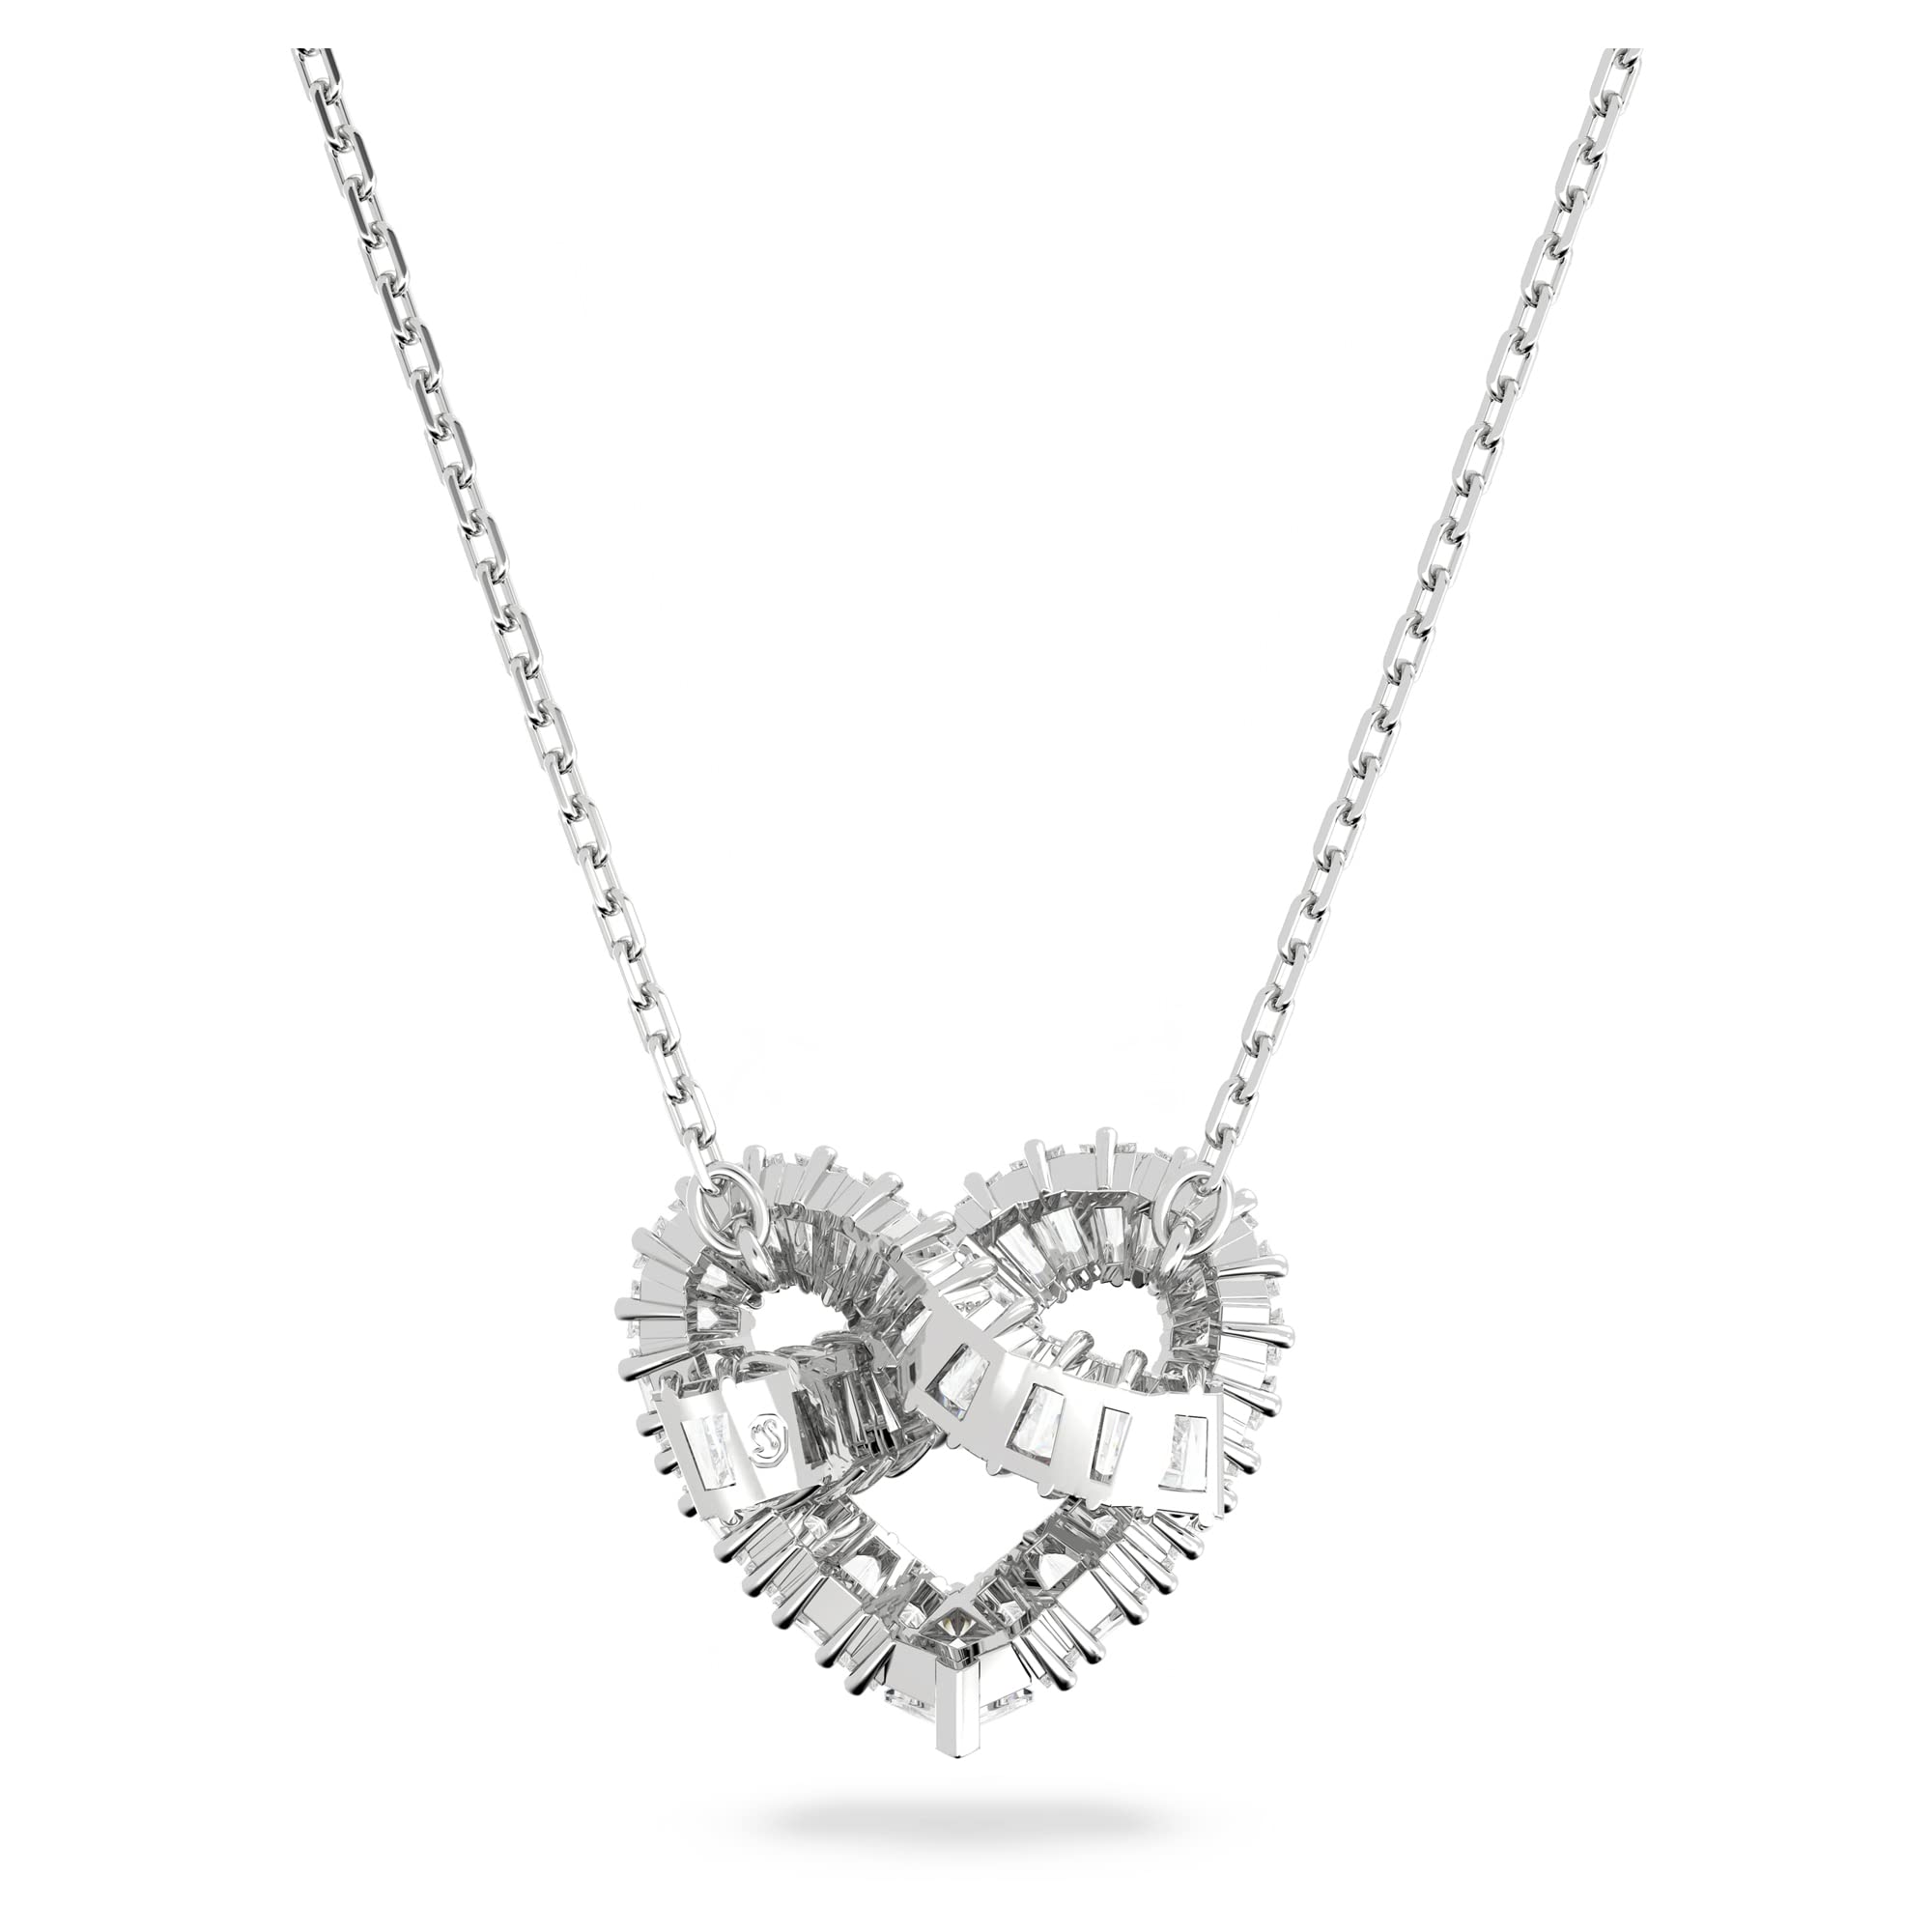 Swarovski Matrix Crystal Jewelry Collection with Heart Symbols and Rhodium Finished Metal